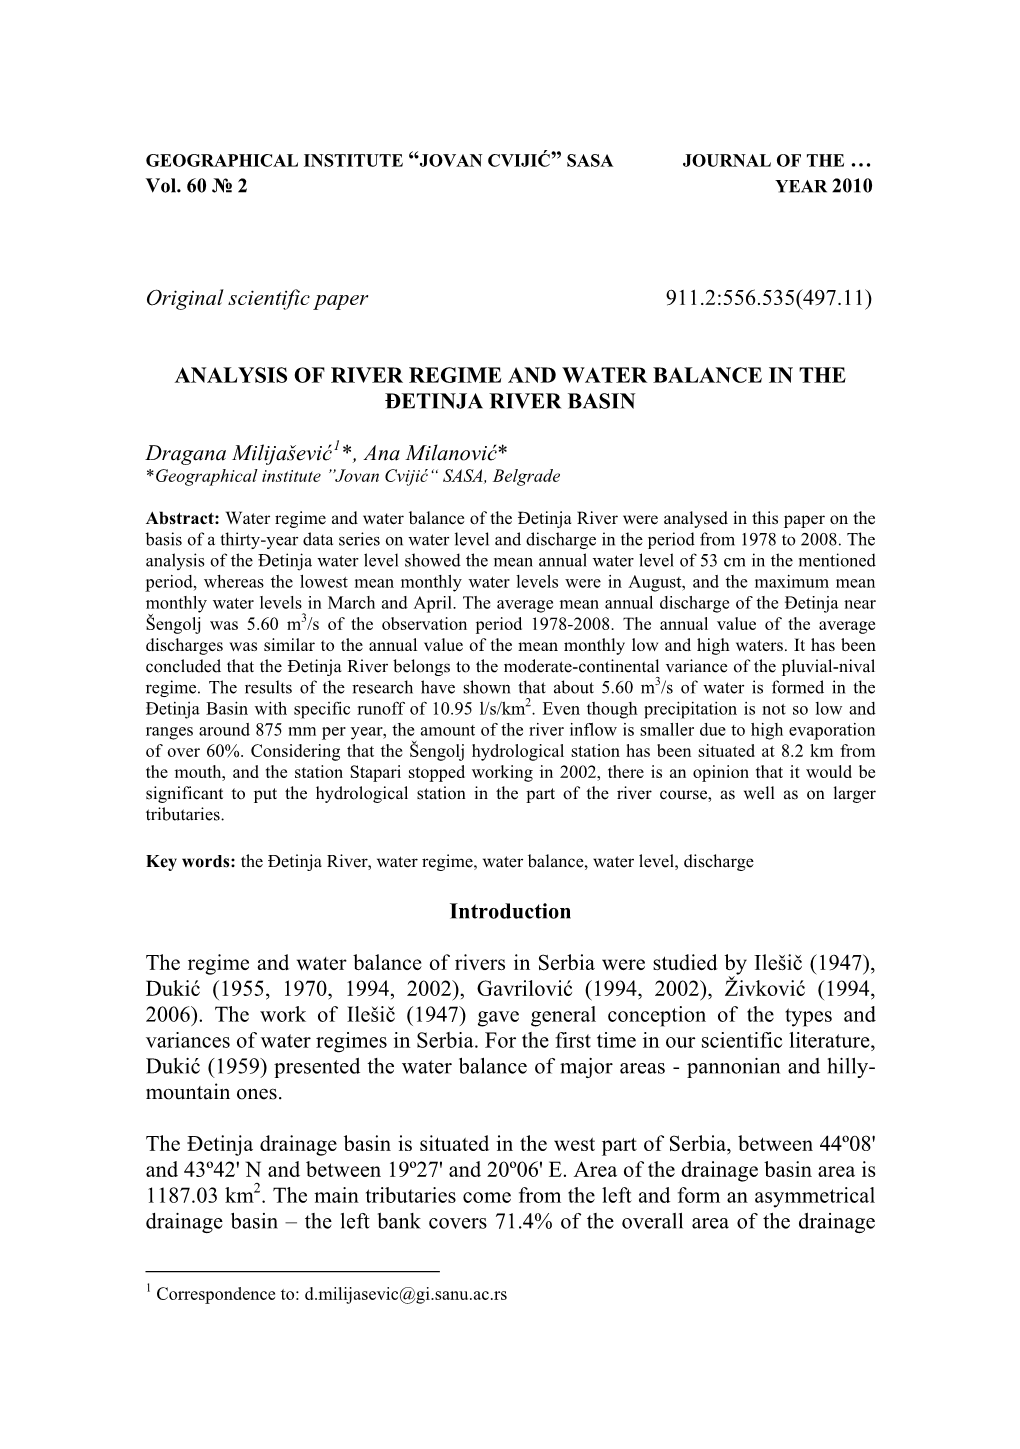 Anlysis of River Regime and Water Balance in the Đetinja River Basin